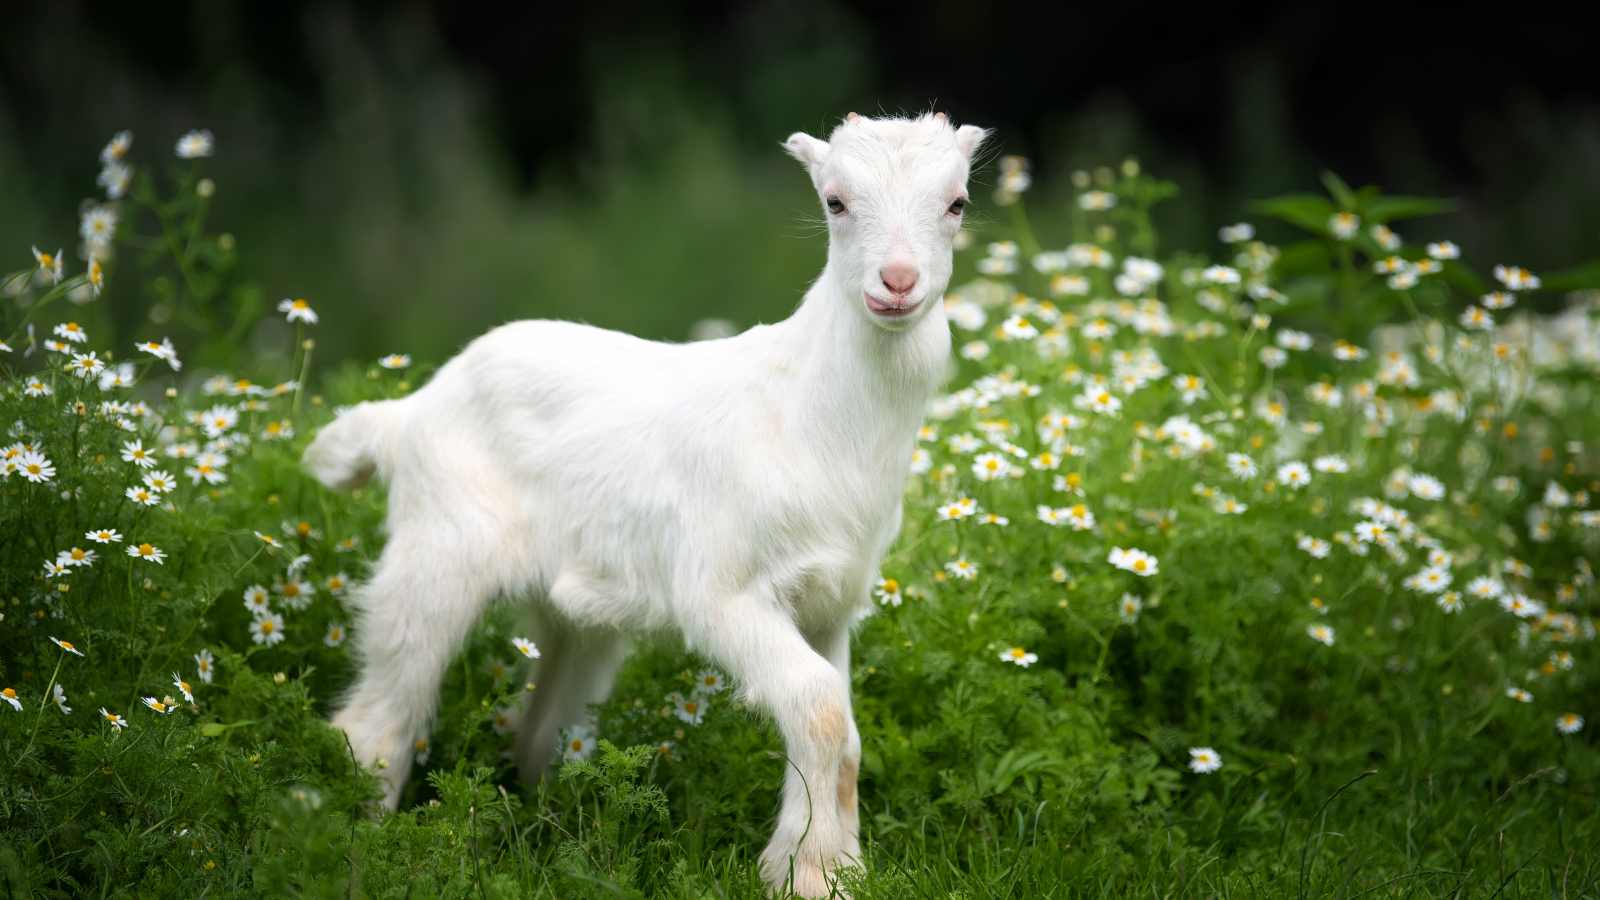 A white baby goat in profile stands in a lush green field in spring.